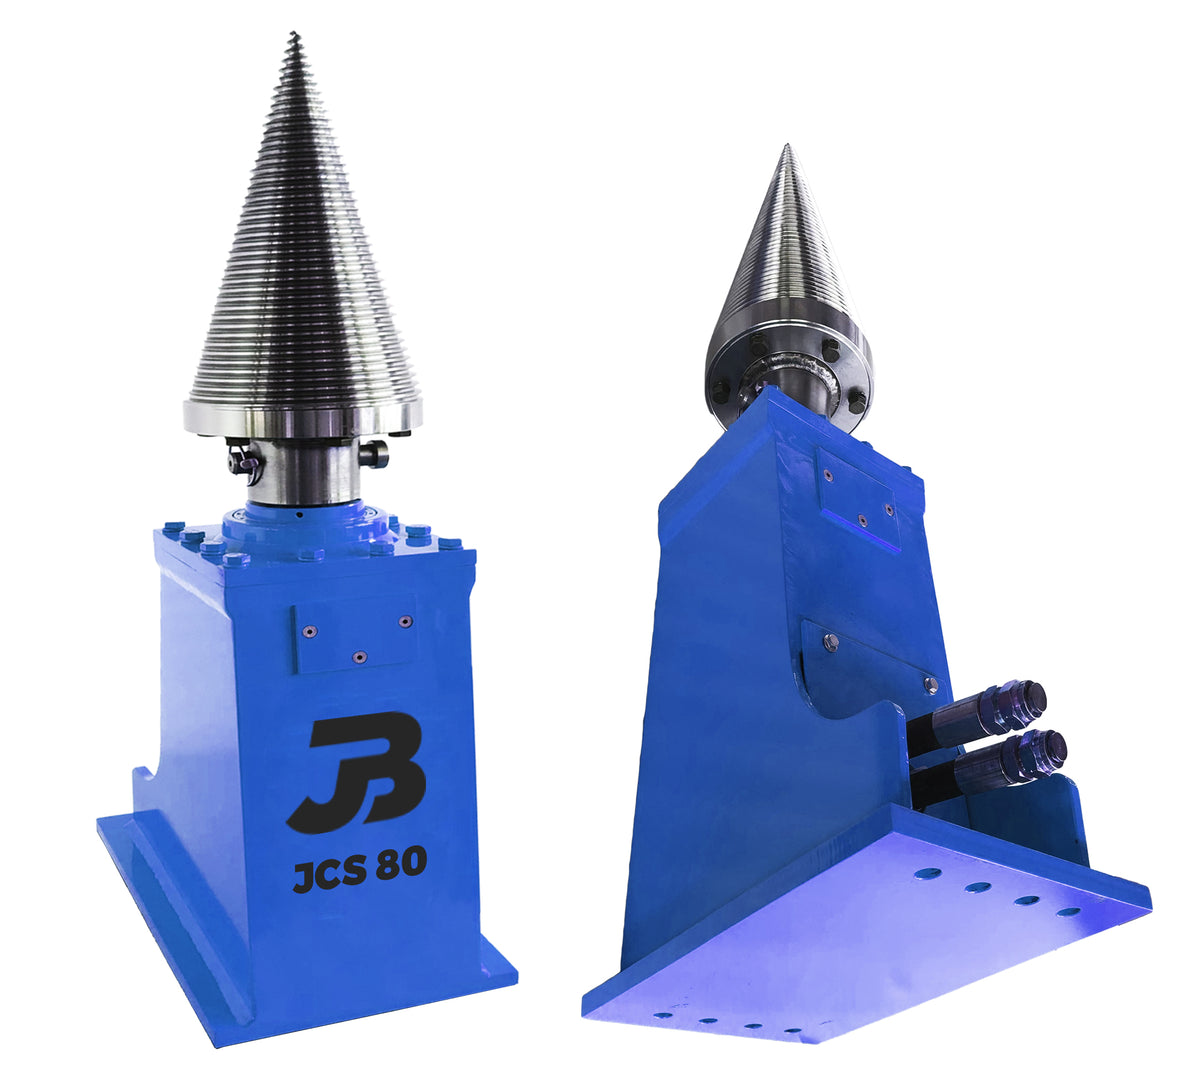 JCS 80 Heavy Duty Hydraulic Cone Timber Splitter to fit Excavators, Telehandlers & More